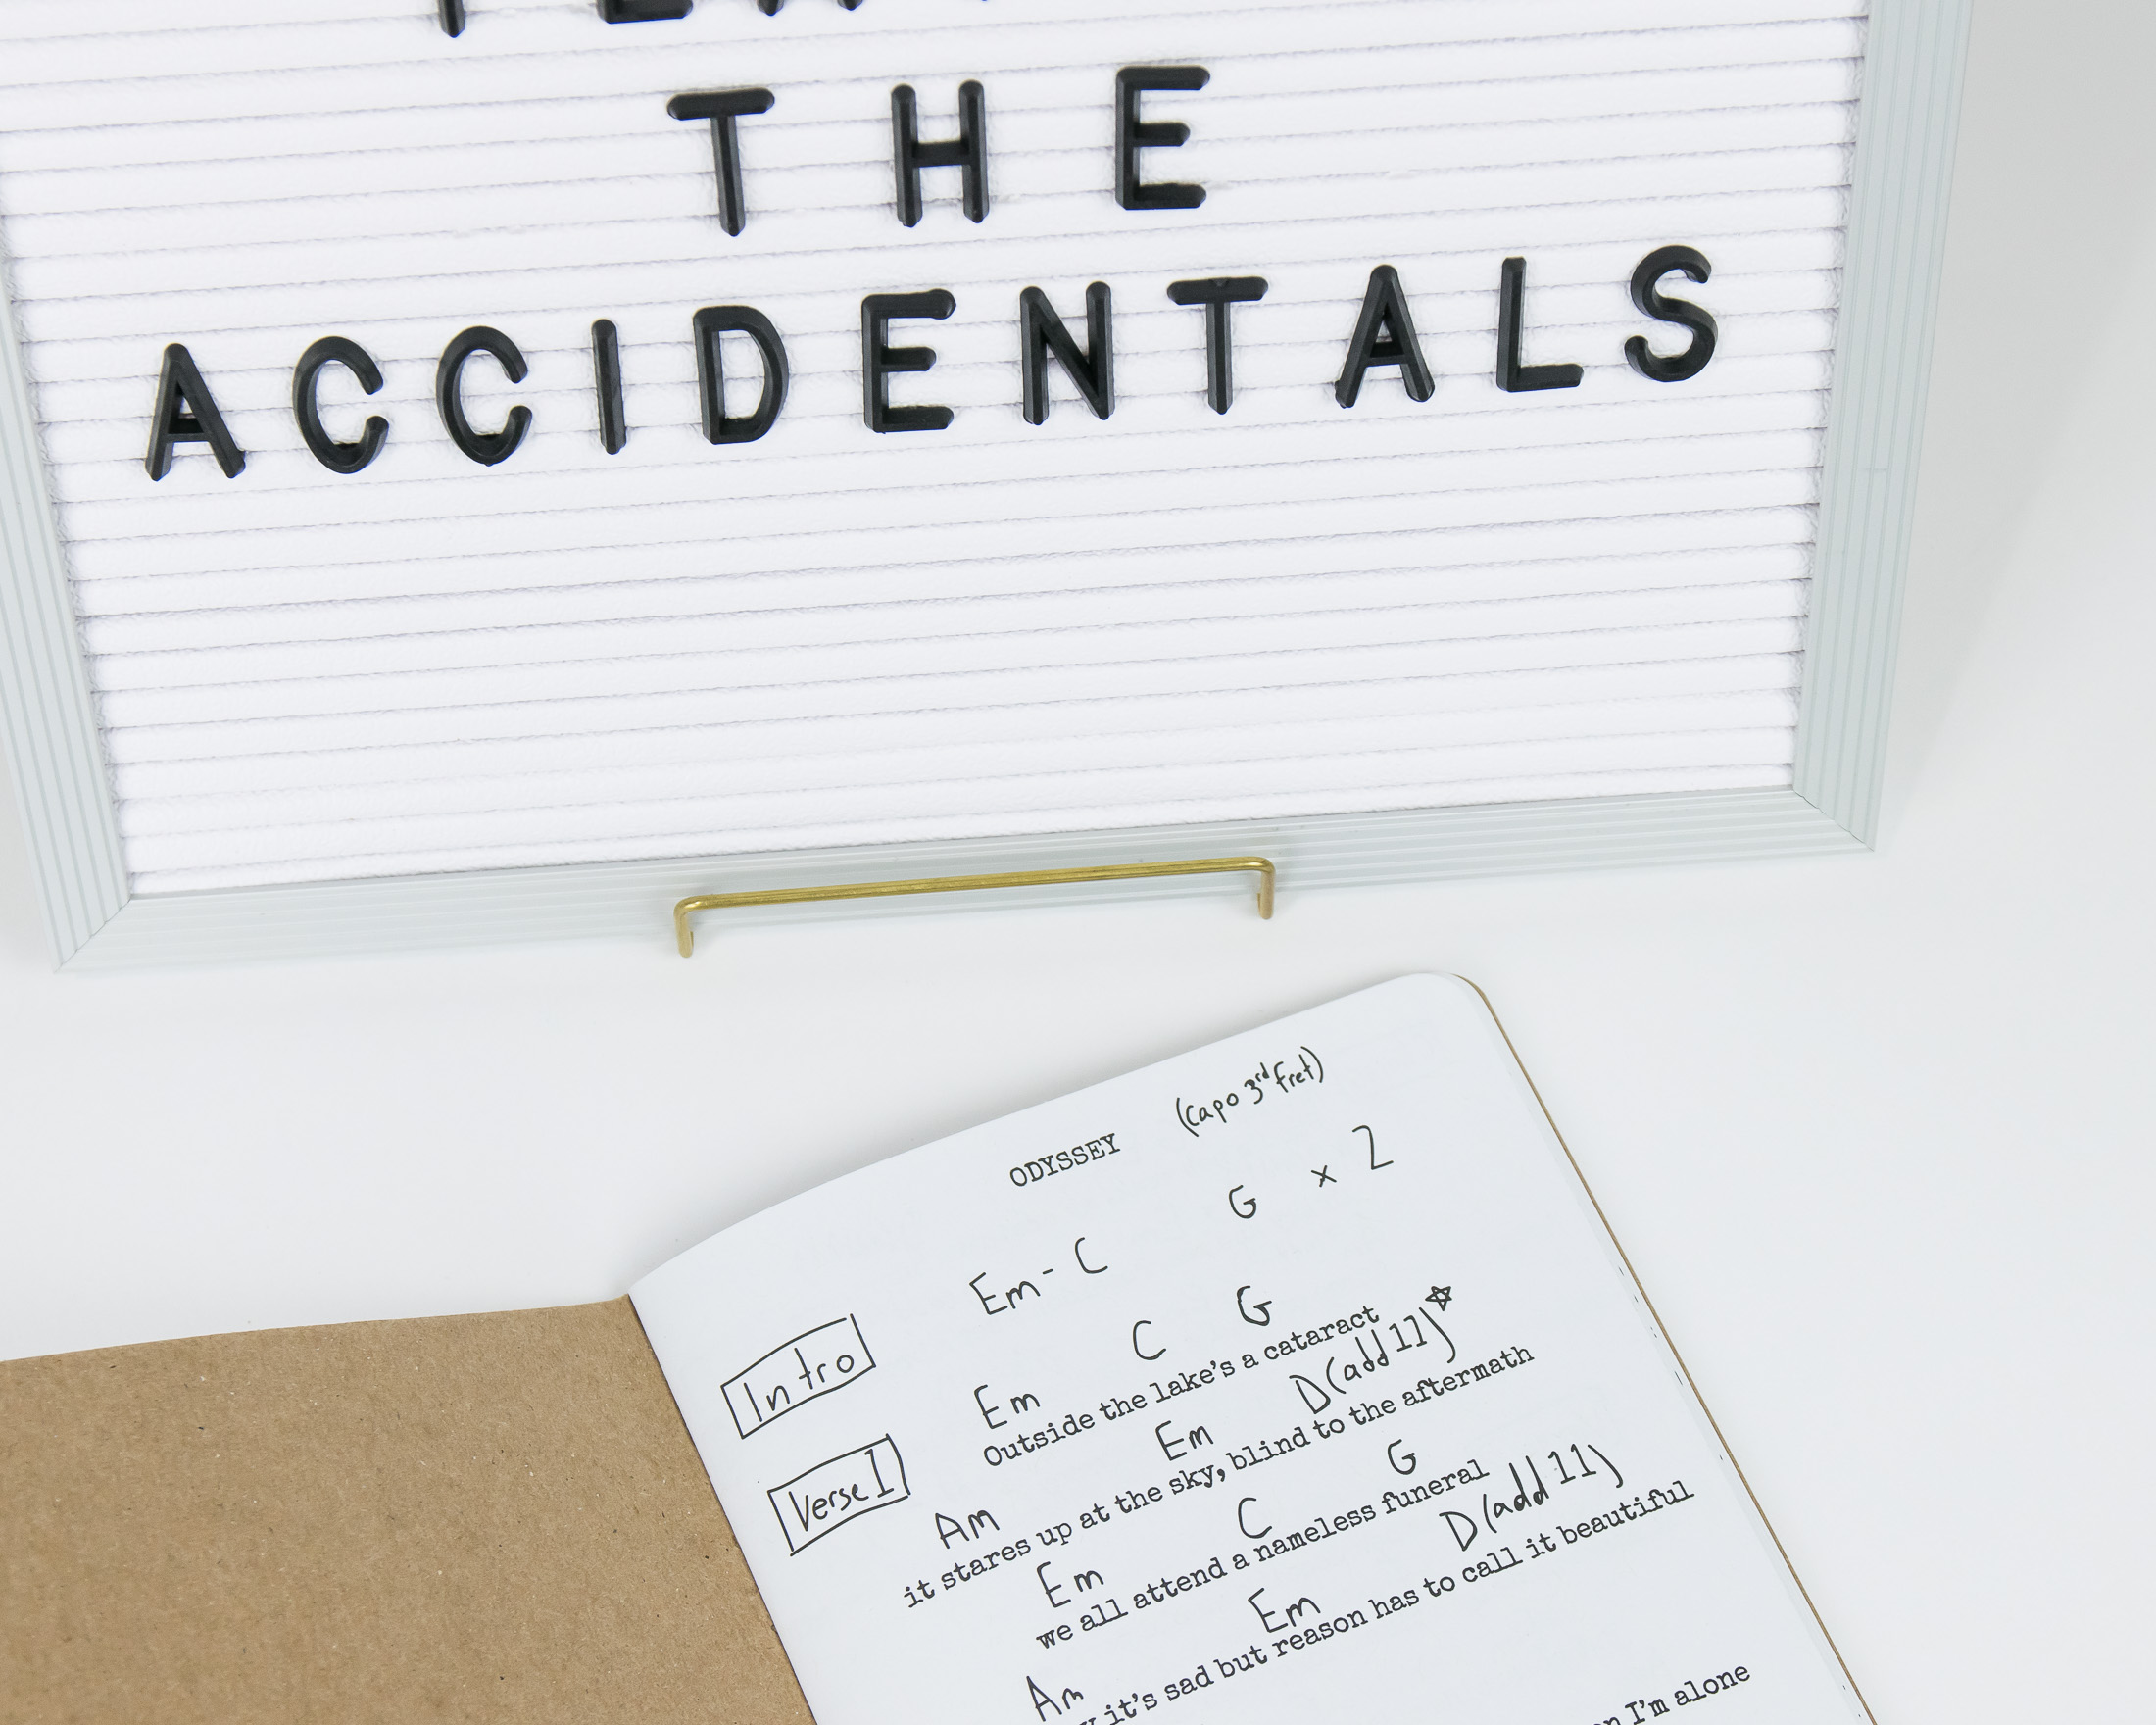 Lyric Book - The Accidentals - Scout Books